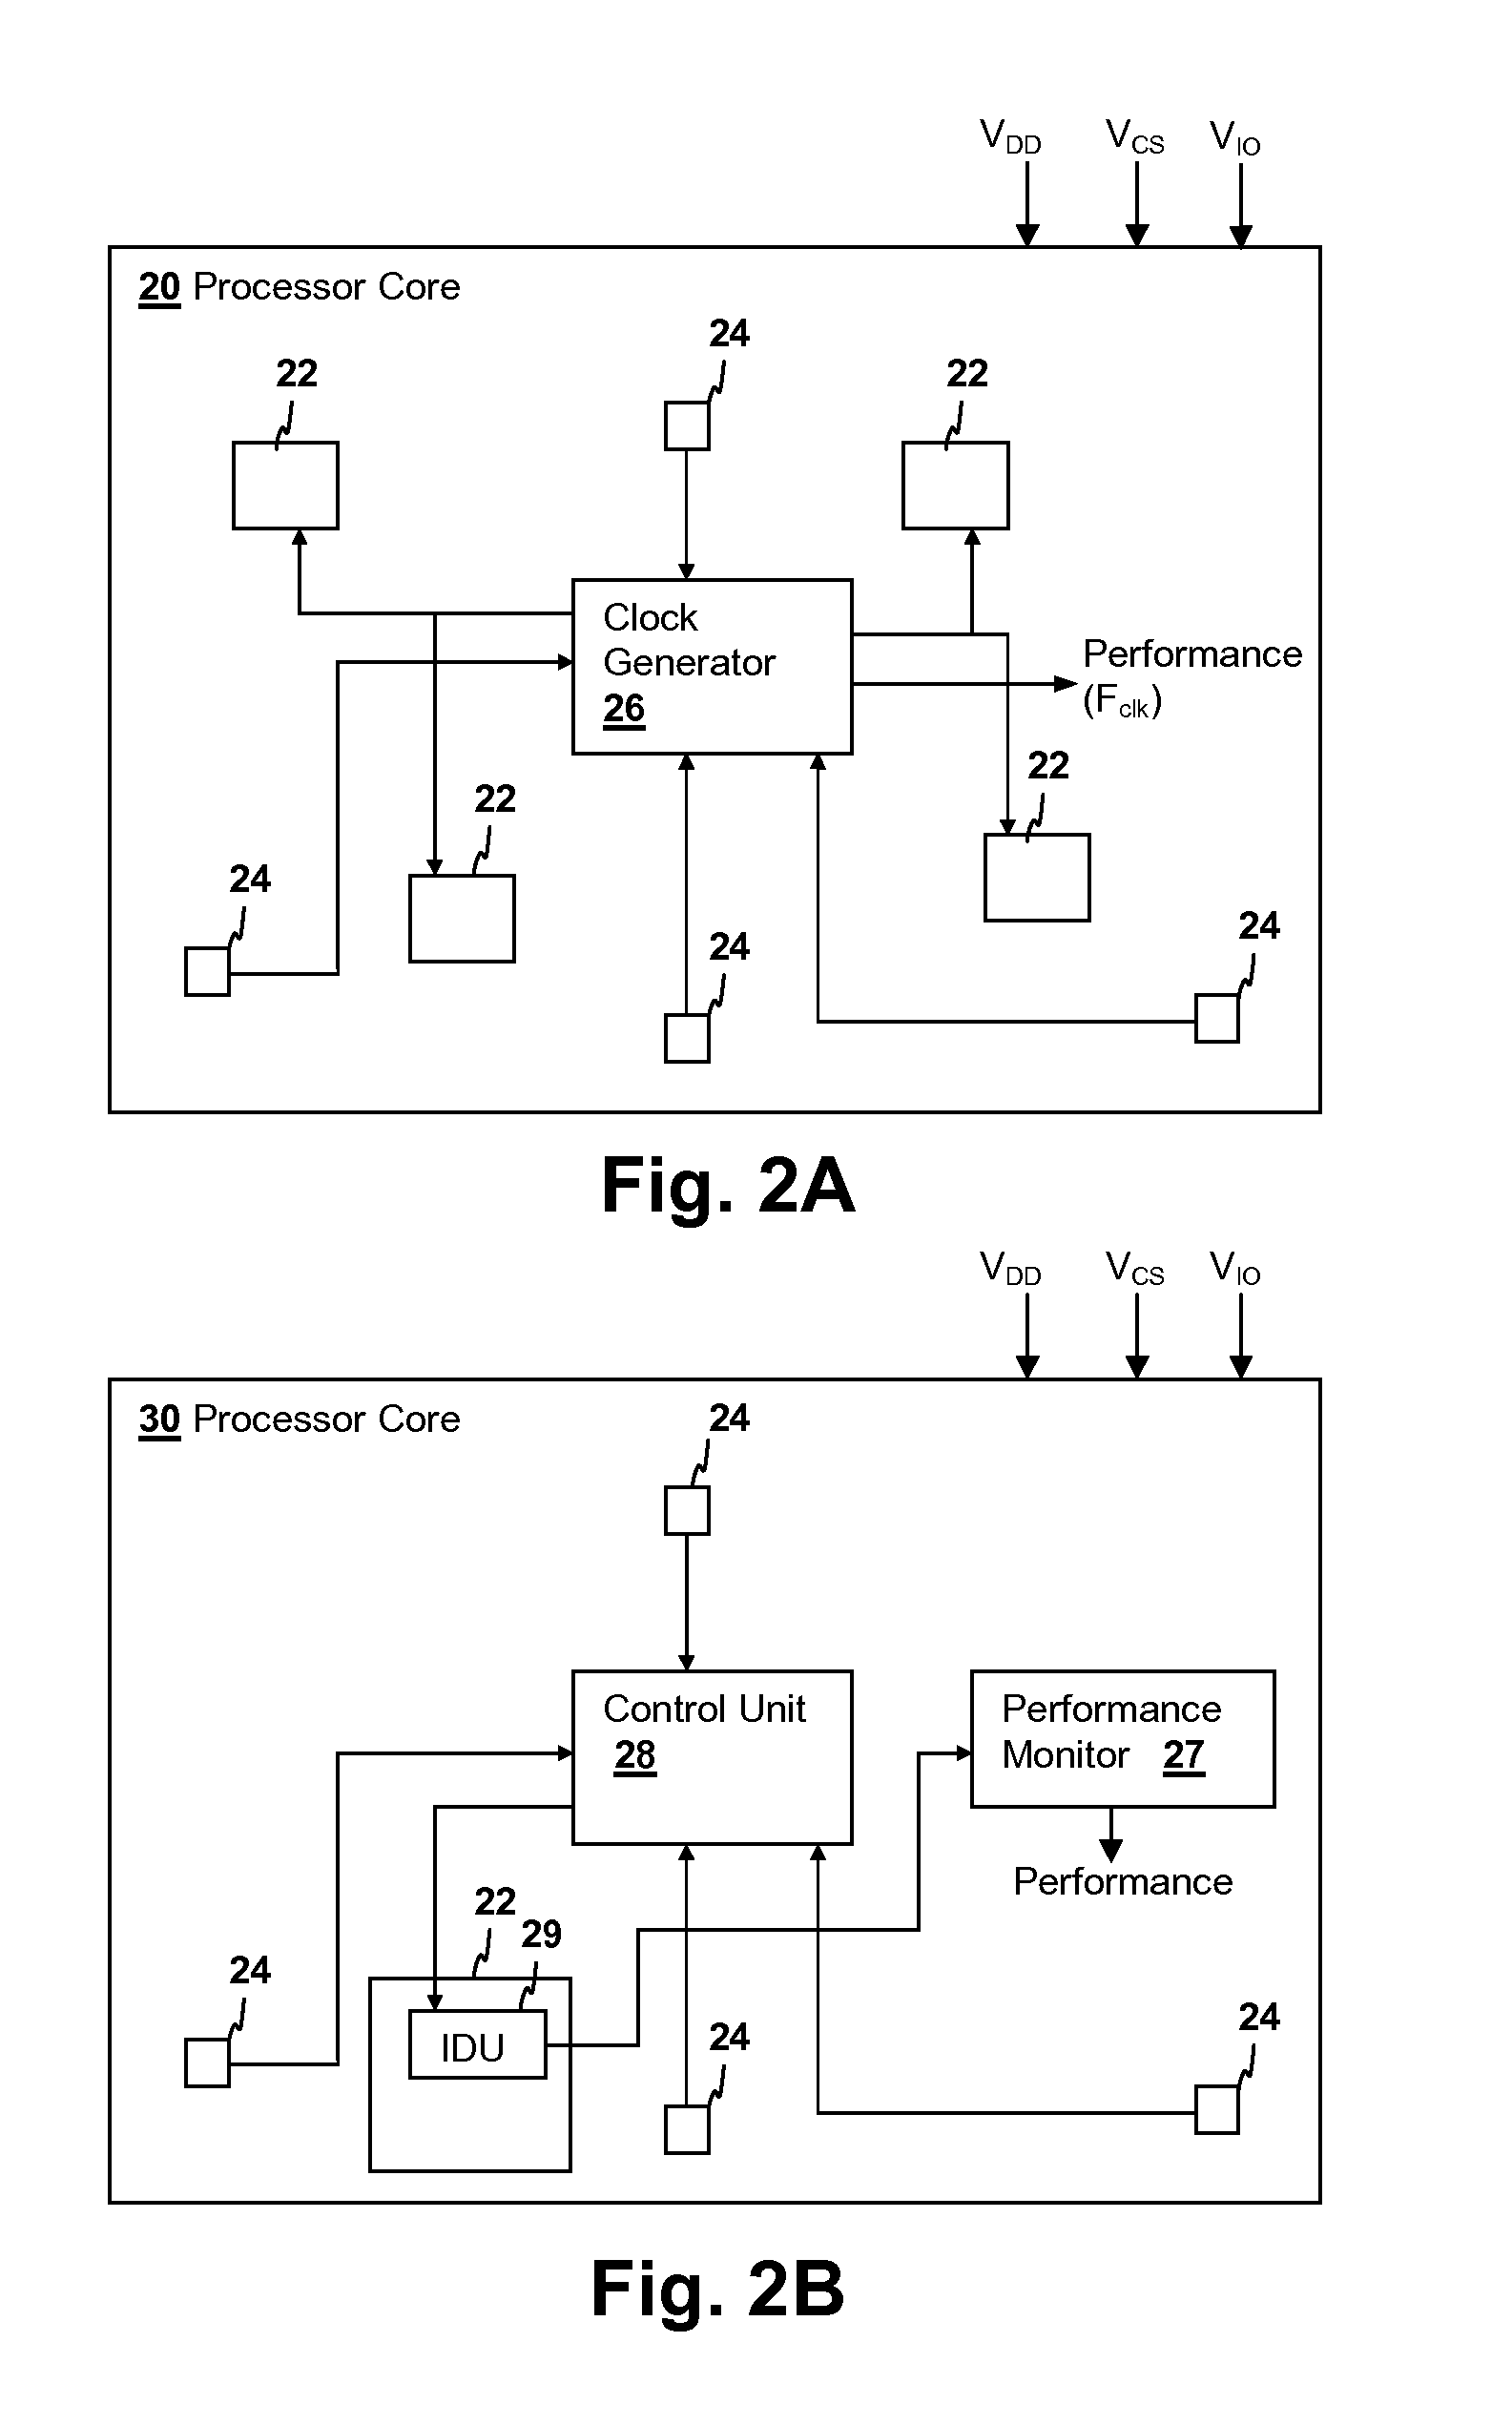 Performance control of frequency-adapting processors by voltage domain adjustment